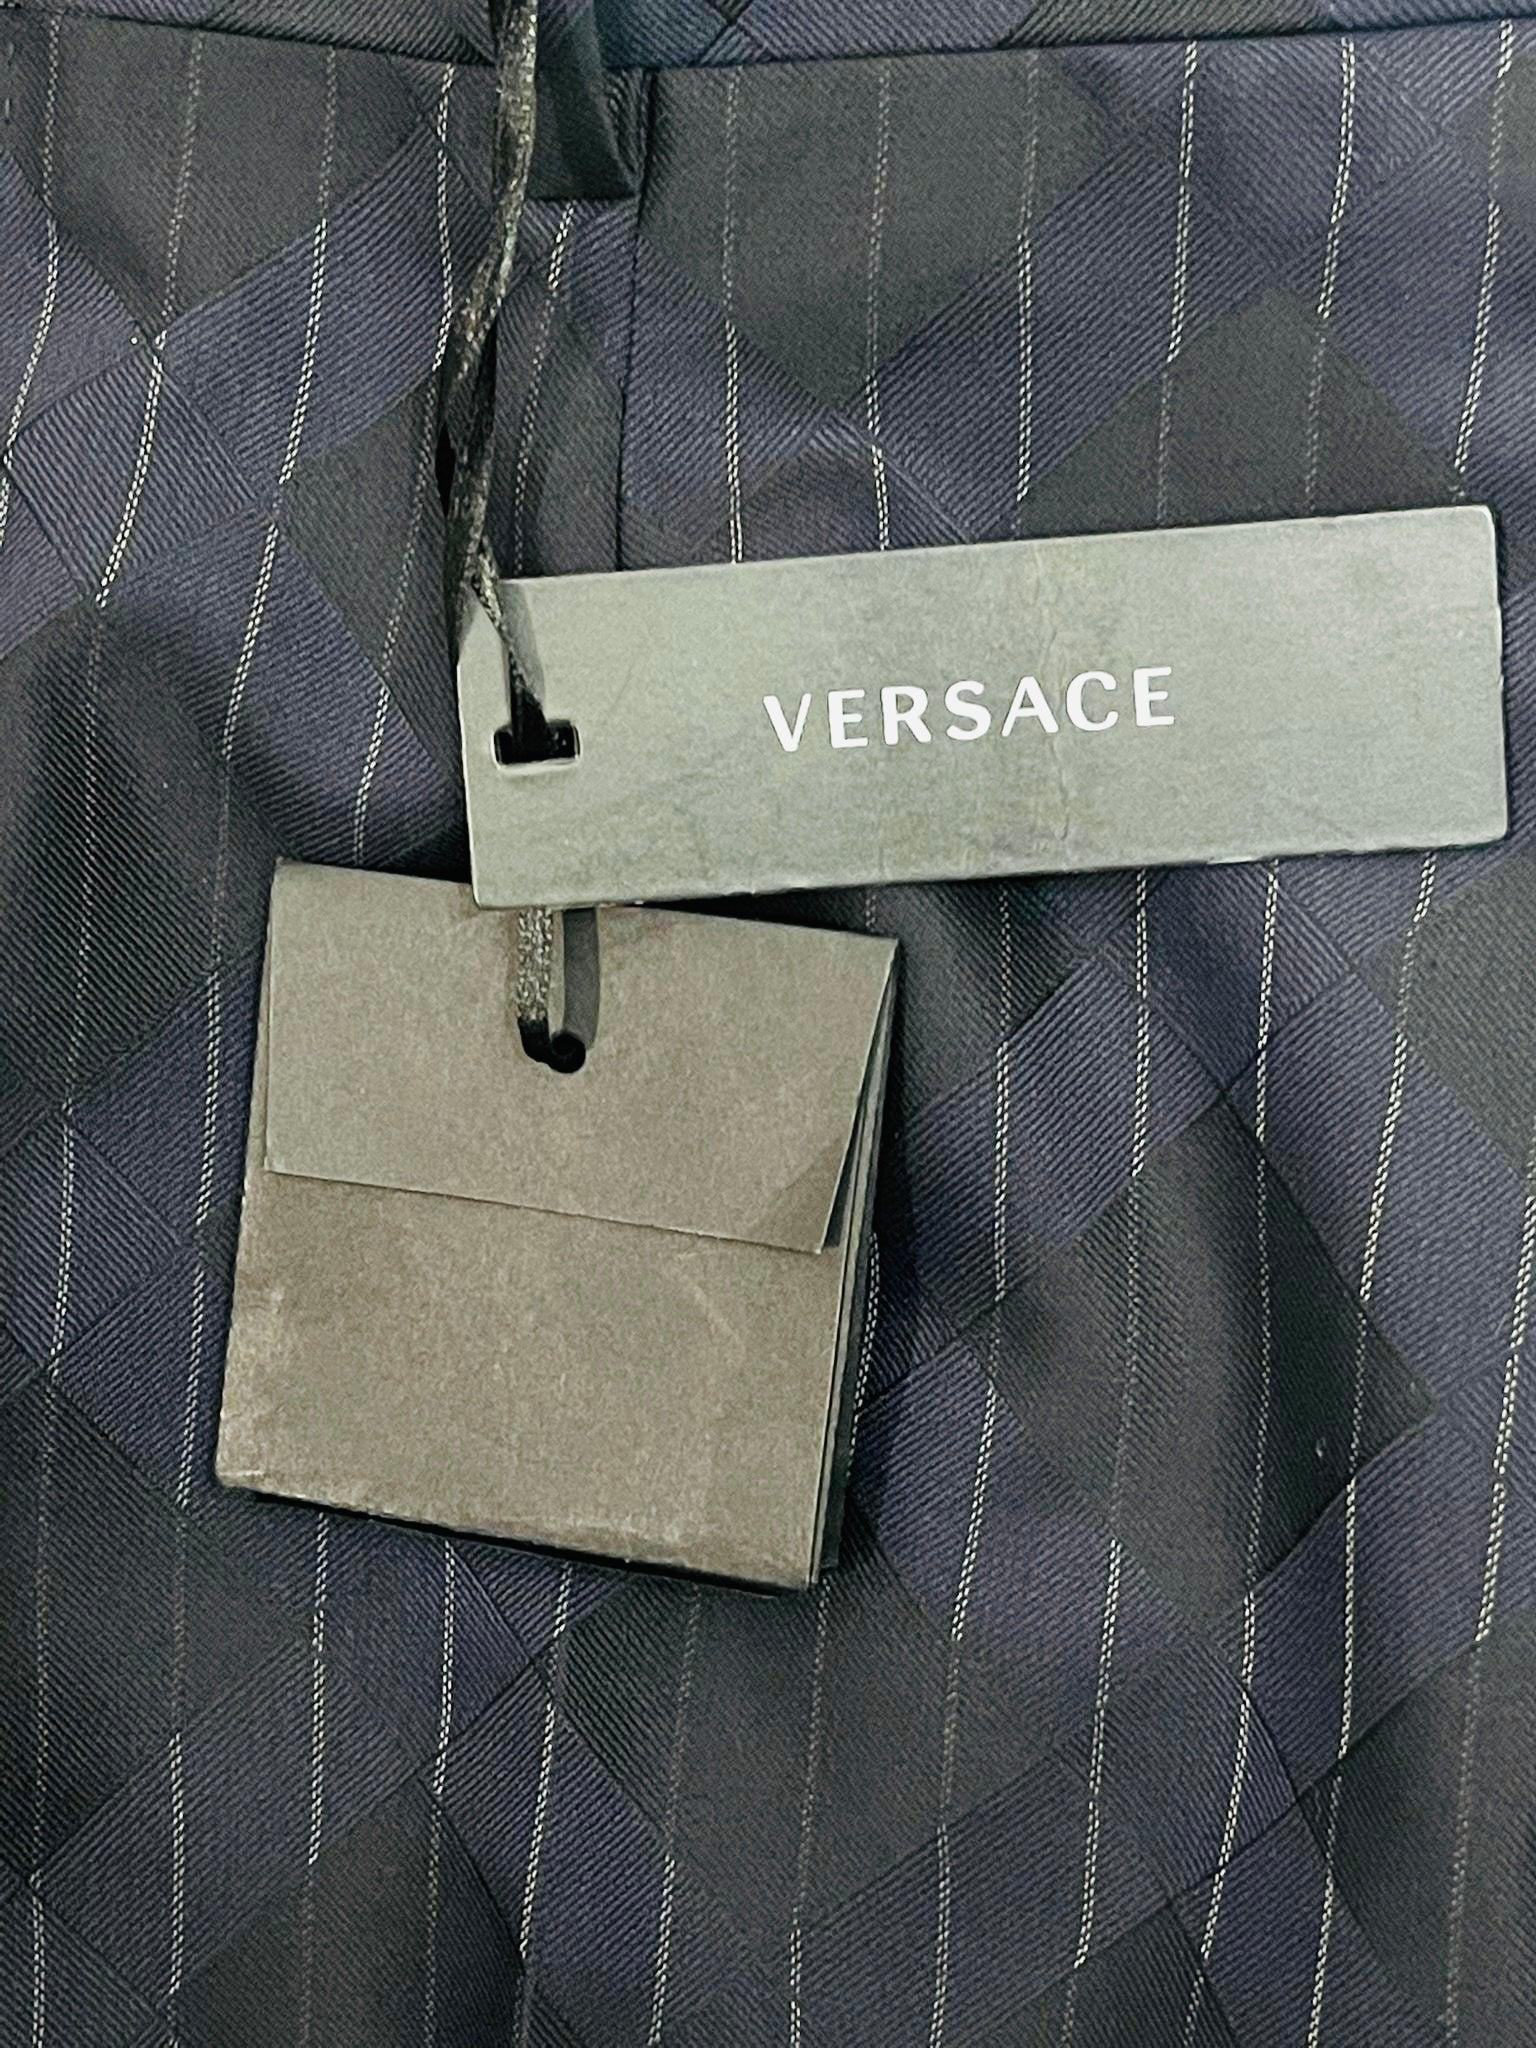 Brand New - Versace Suit - Jacket & Matching Trousers 4